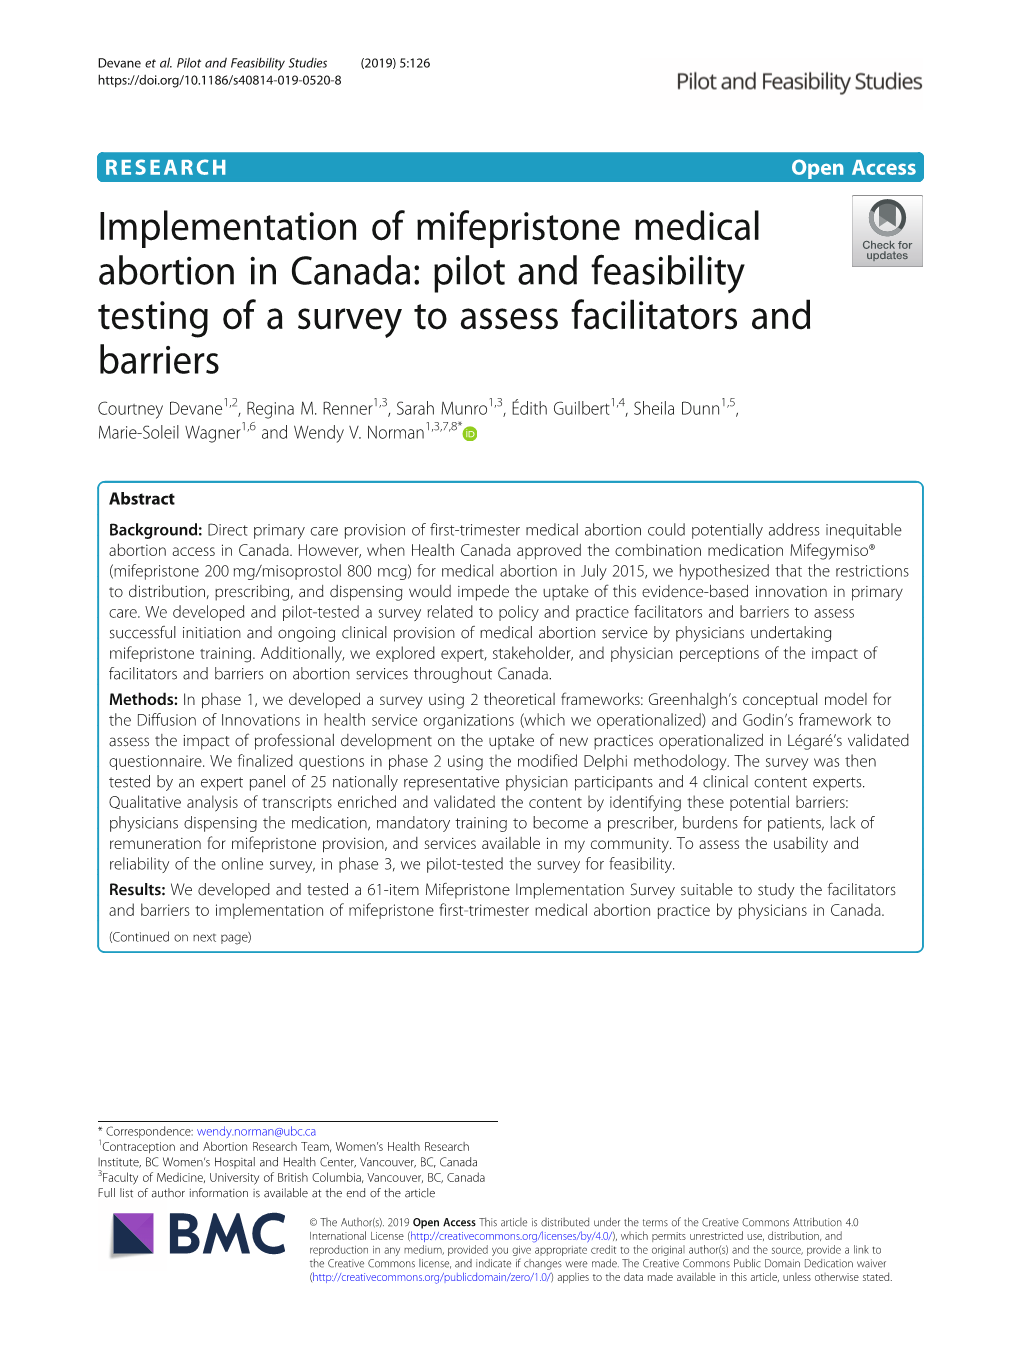 Implementation of Mifepristone Medical Abortion in Canada: Pilot and Feasibility Testing of a Survey to Assess Facilitators and Barriers Courtney Devane1,2, Regina M